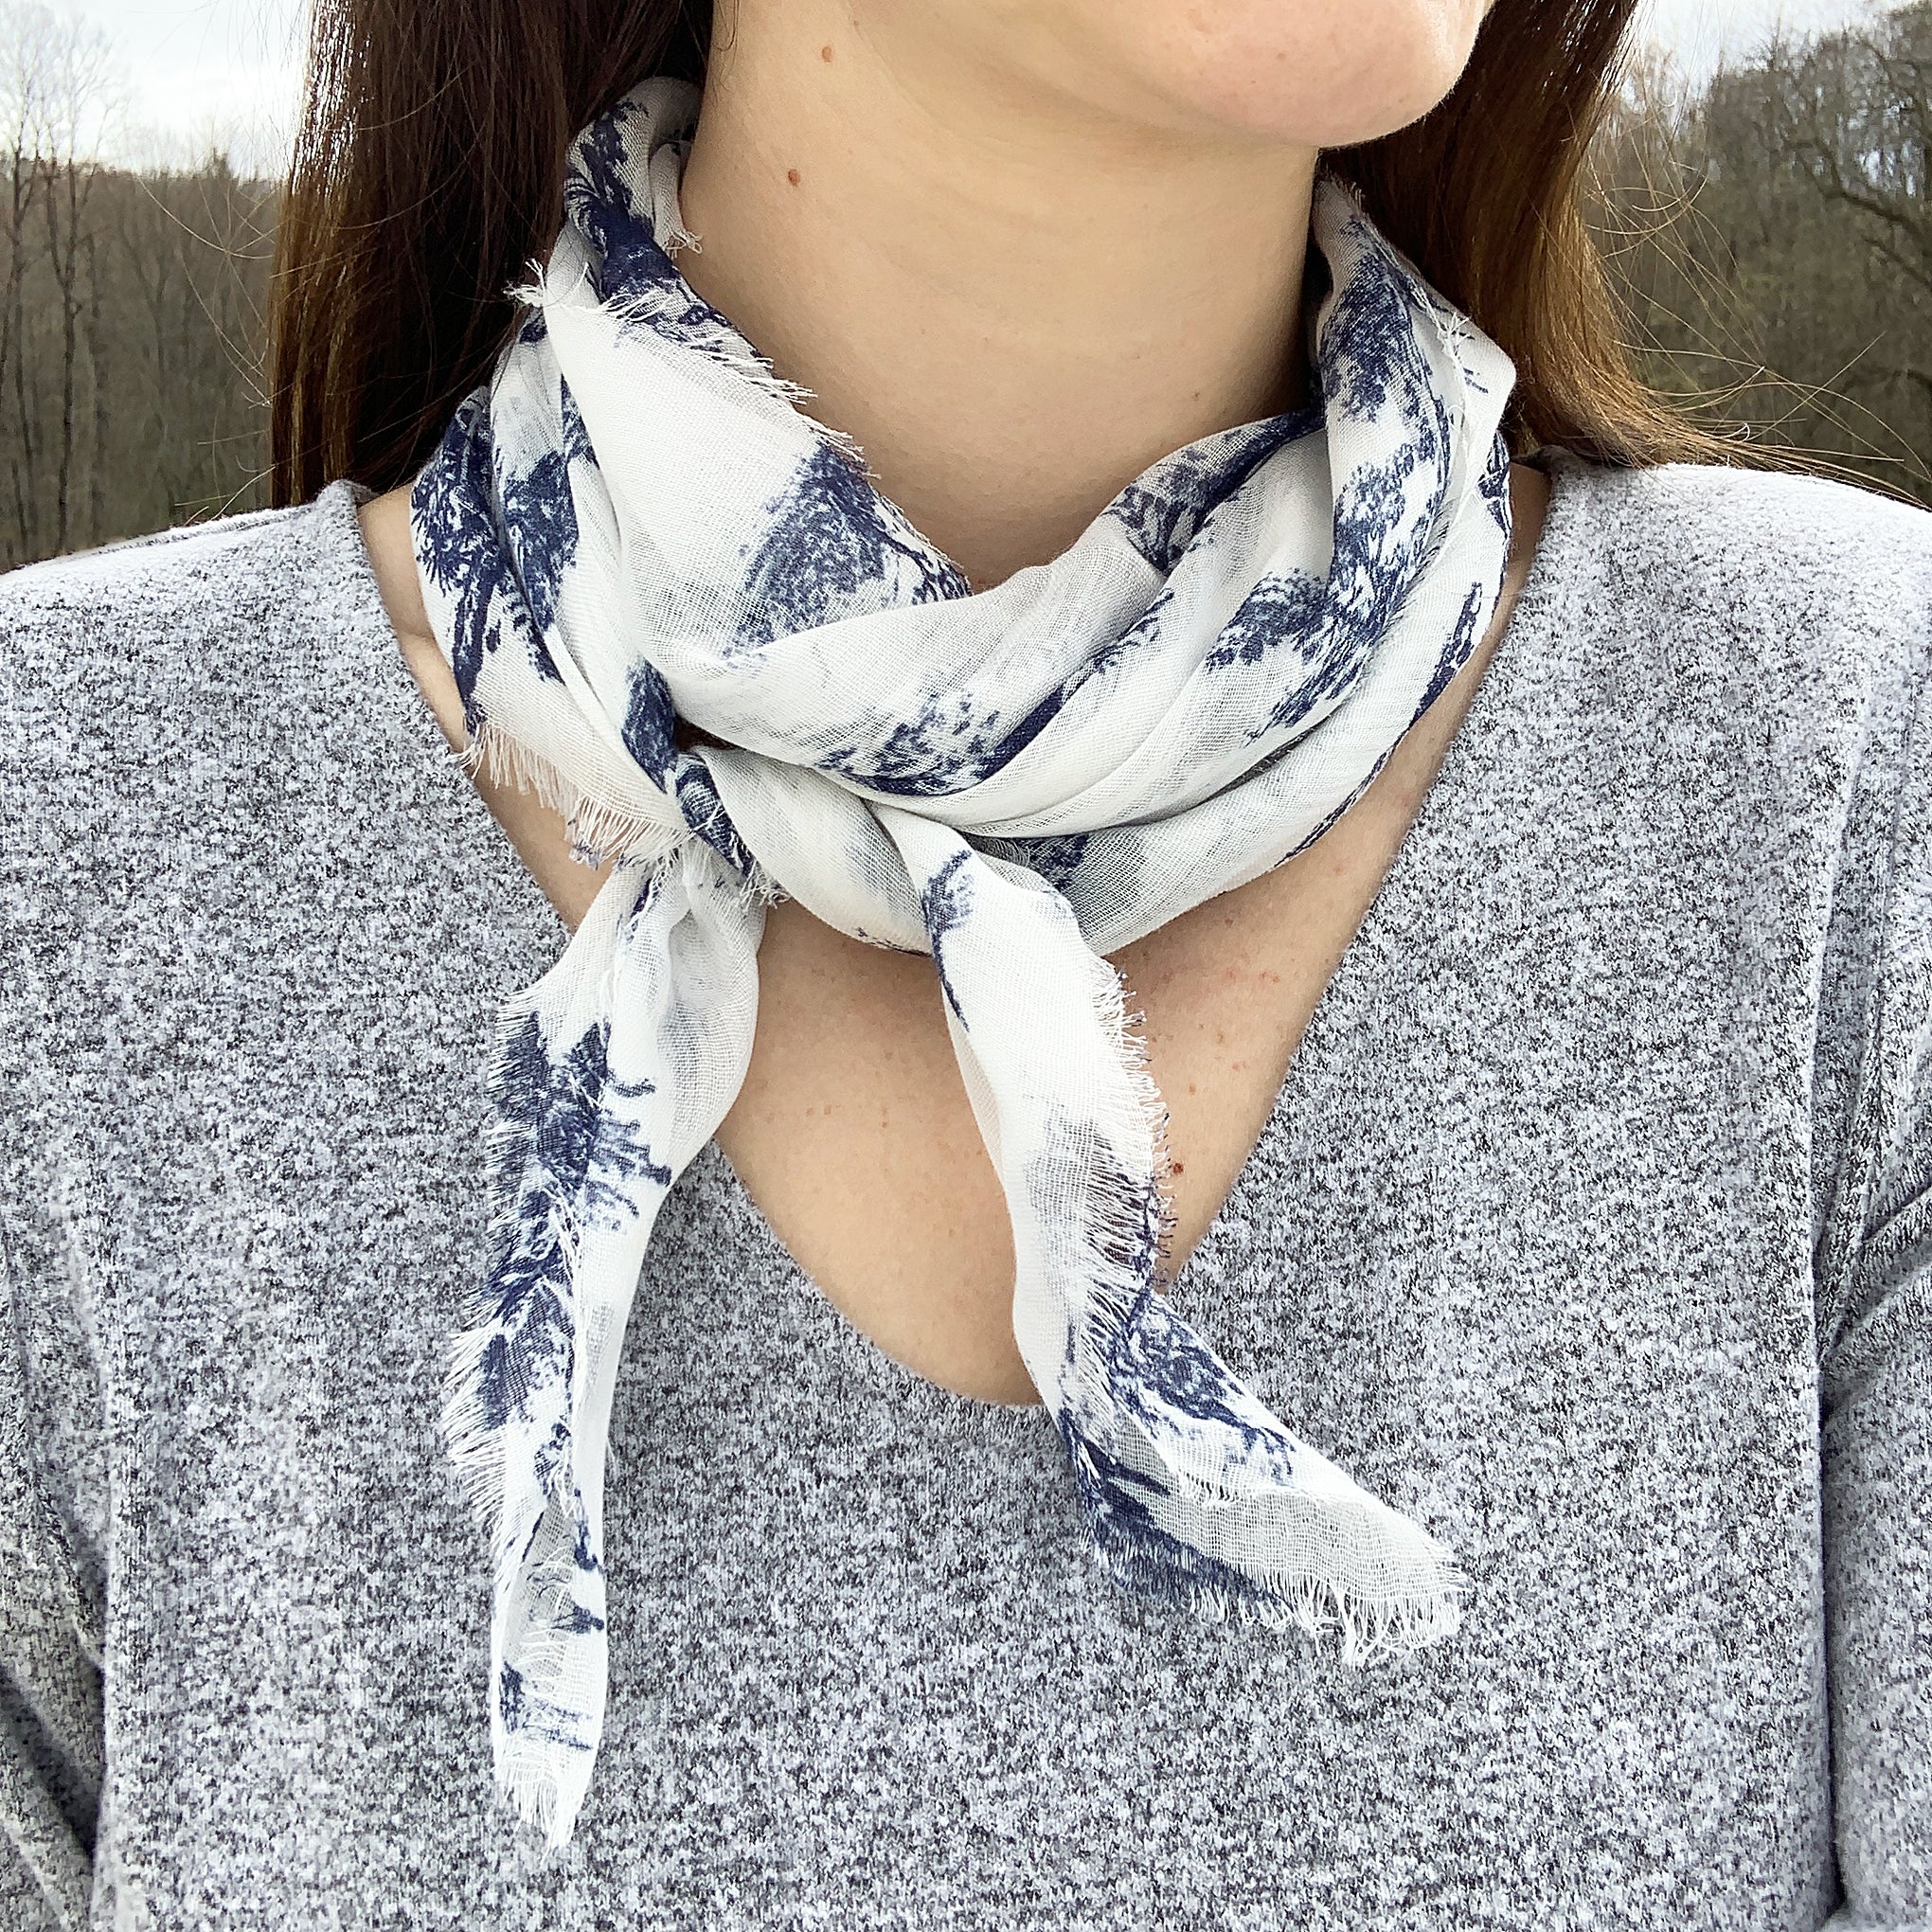 Blue Pacific English Colonial Neckerchief Scarf in Navy Blue and White